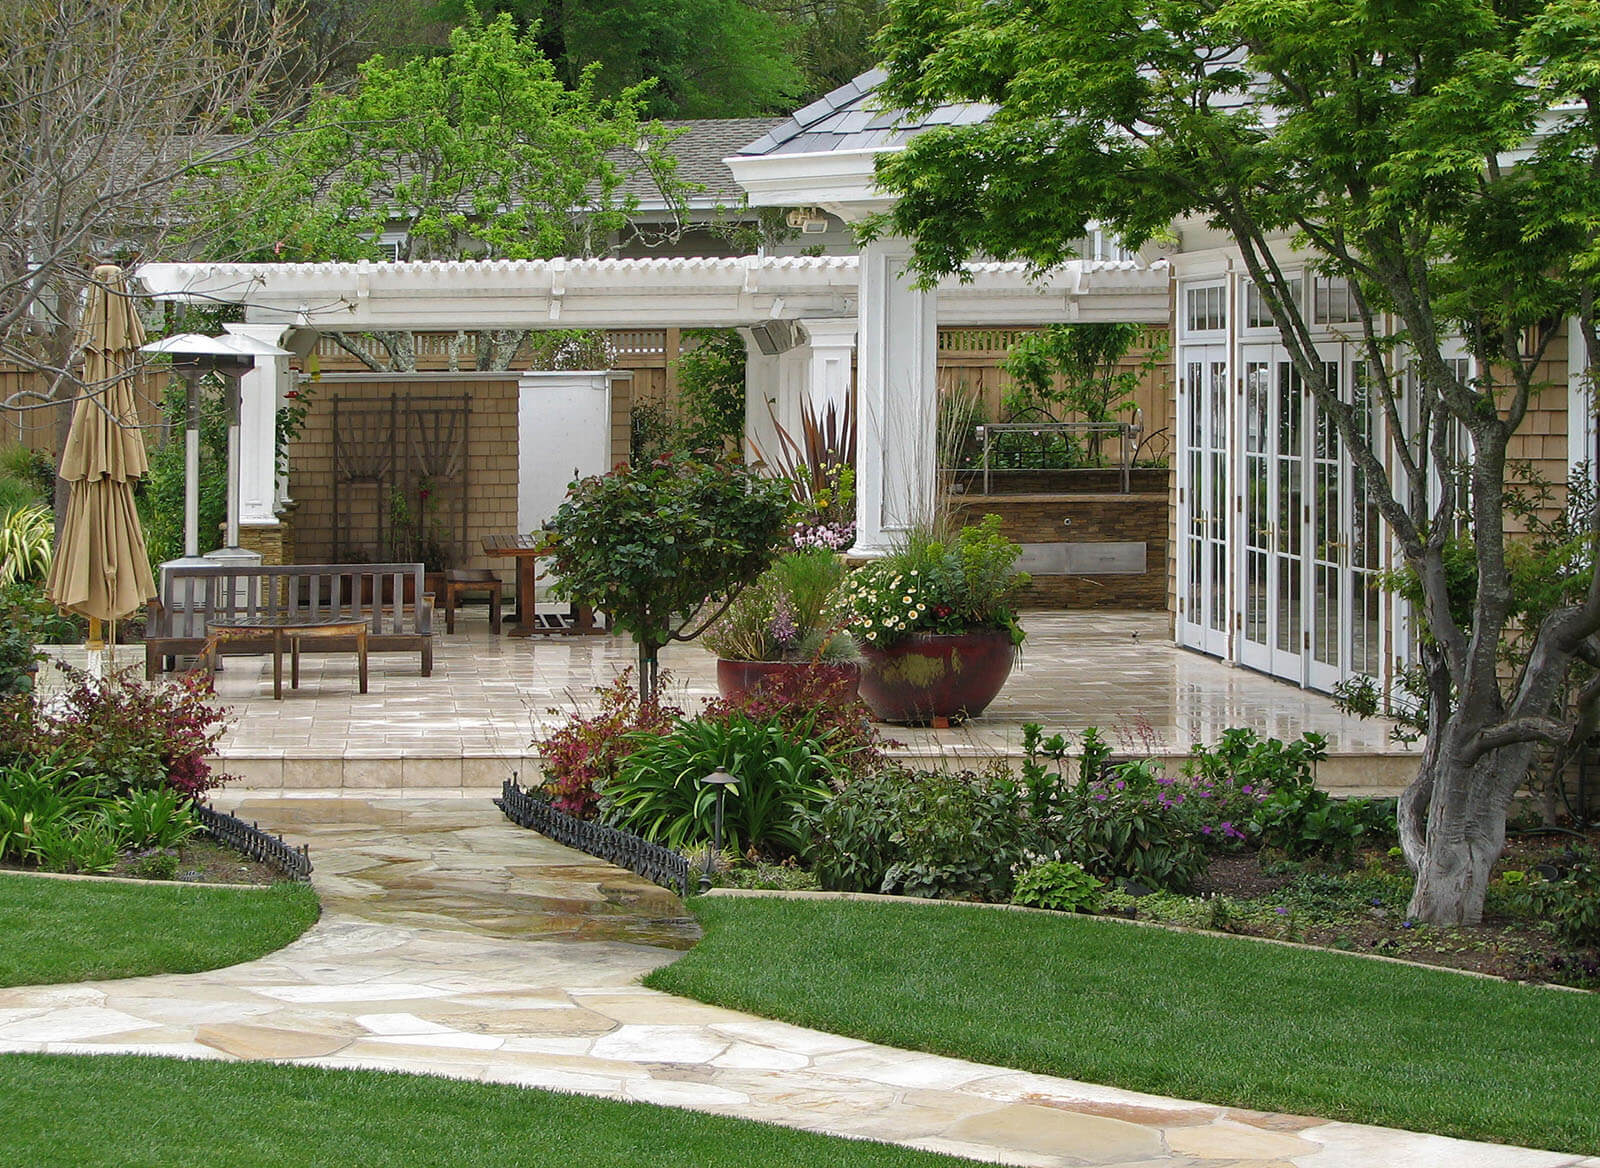 large elevated white stone patio sporting rustic wooden furniture, ornamental ceramic pots, flower beds with a white stone path going down the middle